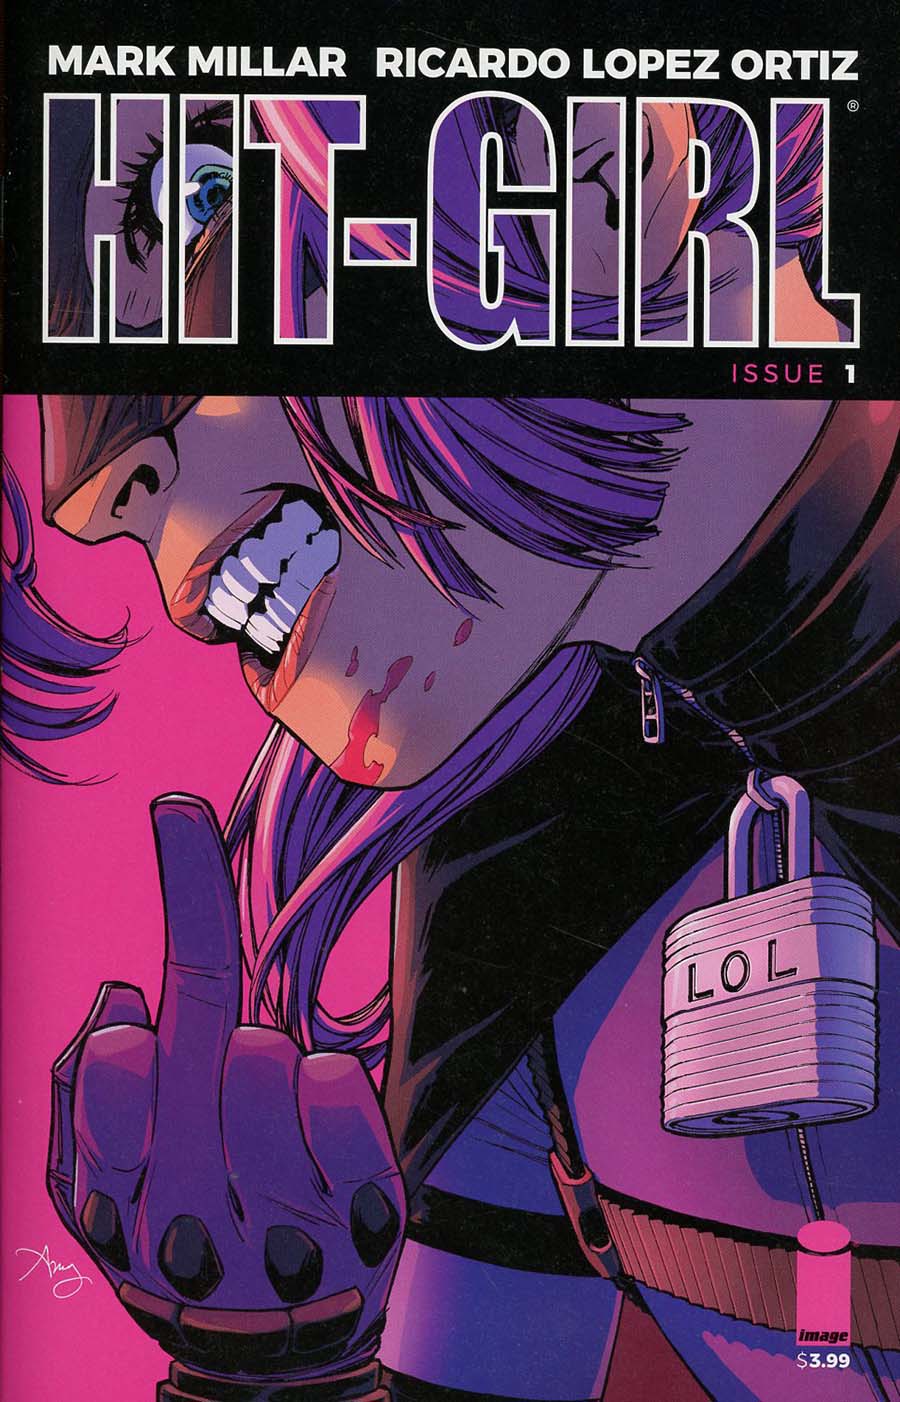 Hit-Girl Vol 2 #1 Cover A 1st Ptg Regular Amy Reeder Color Cover